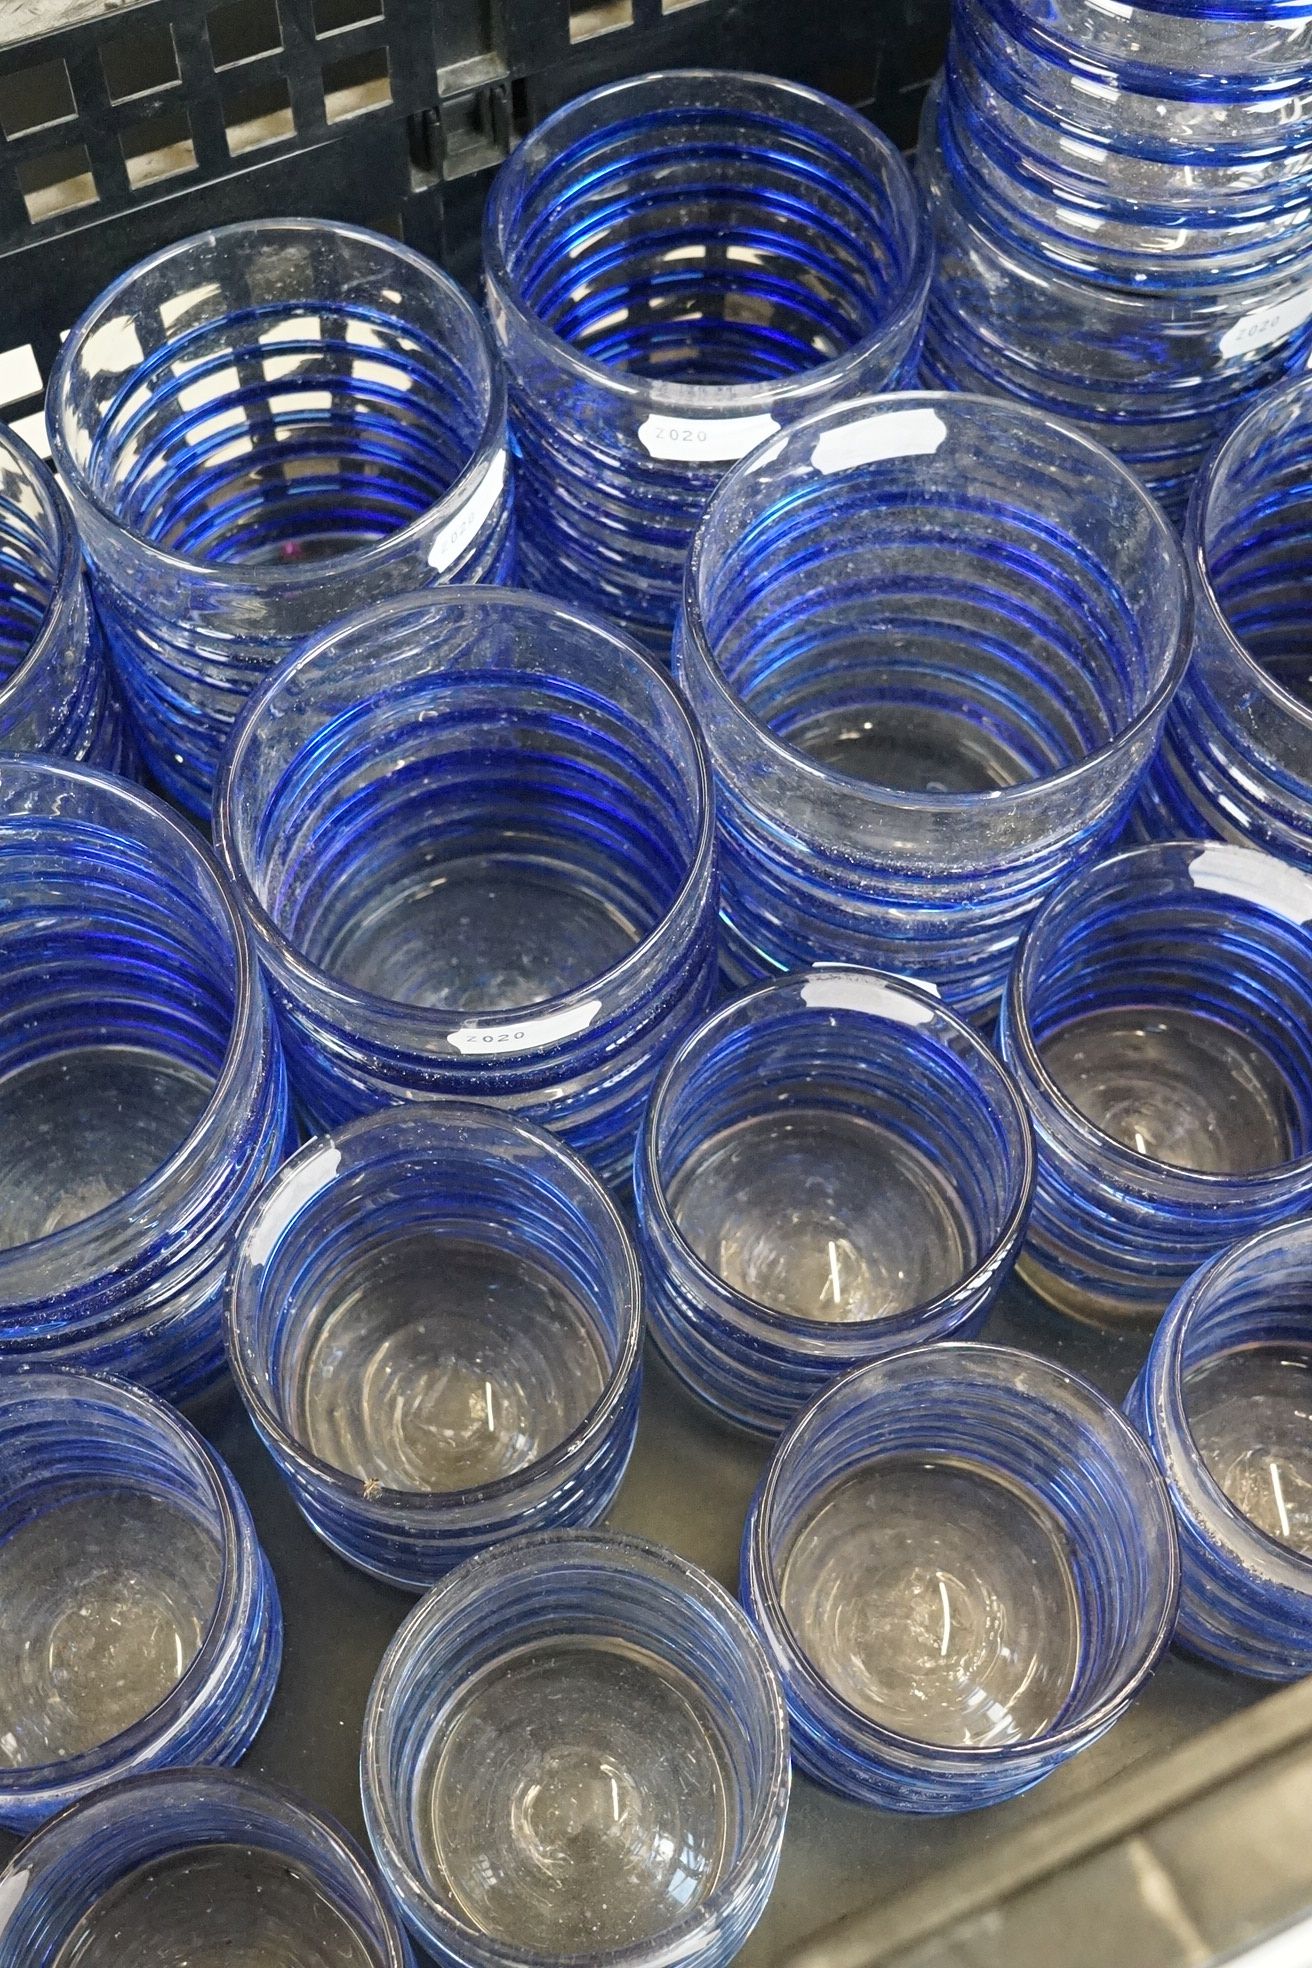 Set of 22 spiral-effect studio glass drinking glasses with relief blue spirals on a clear glass - Image 3 of 6